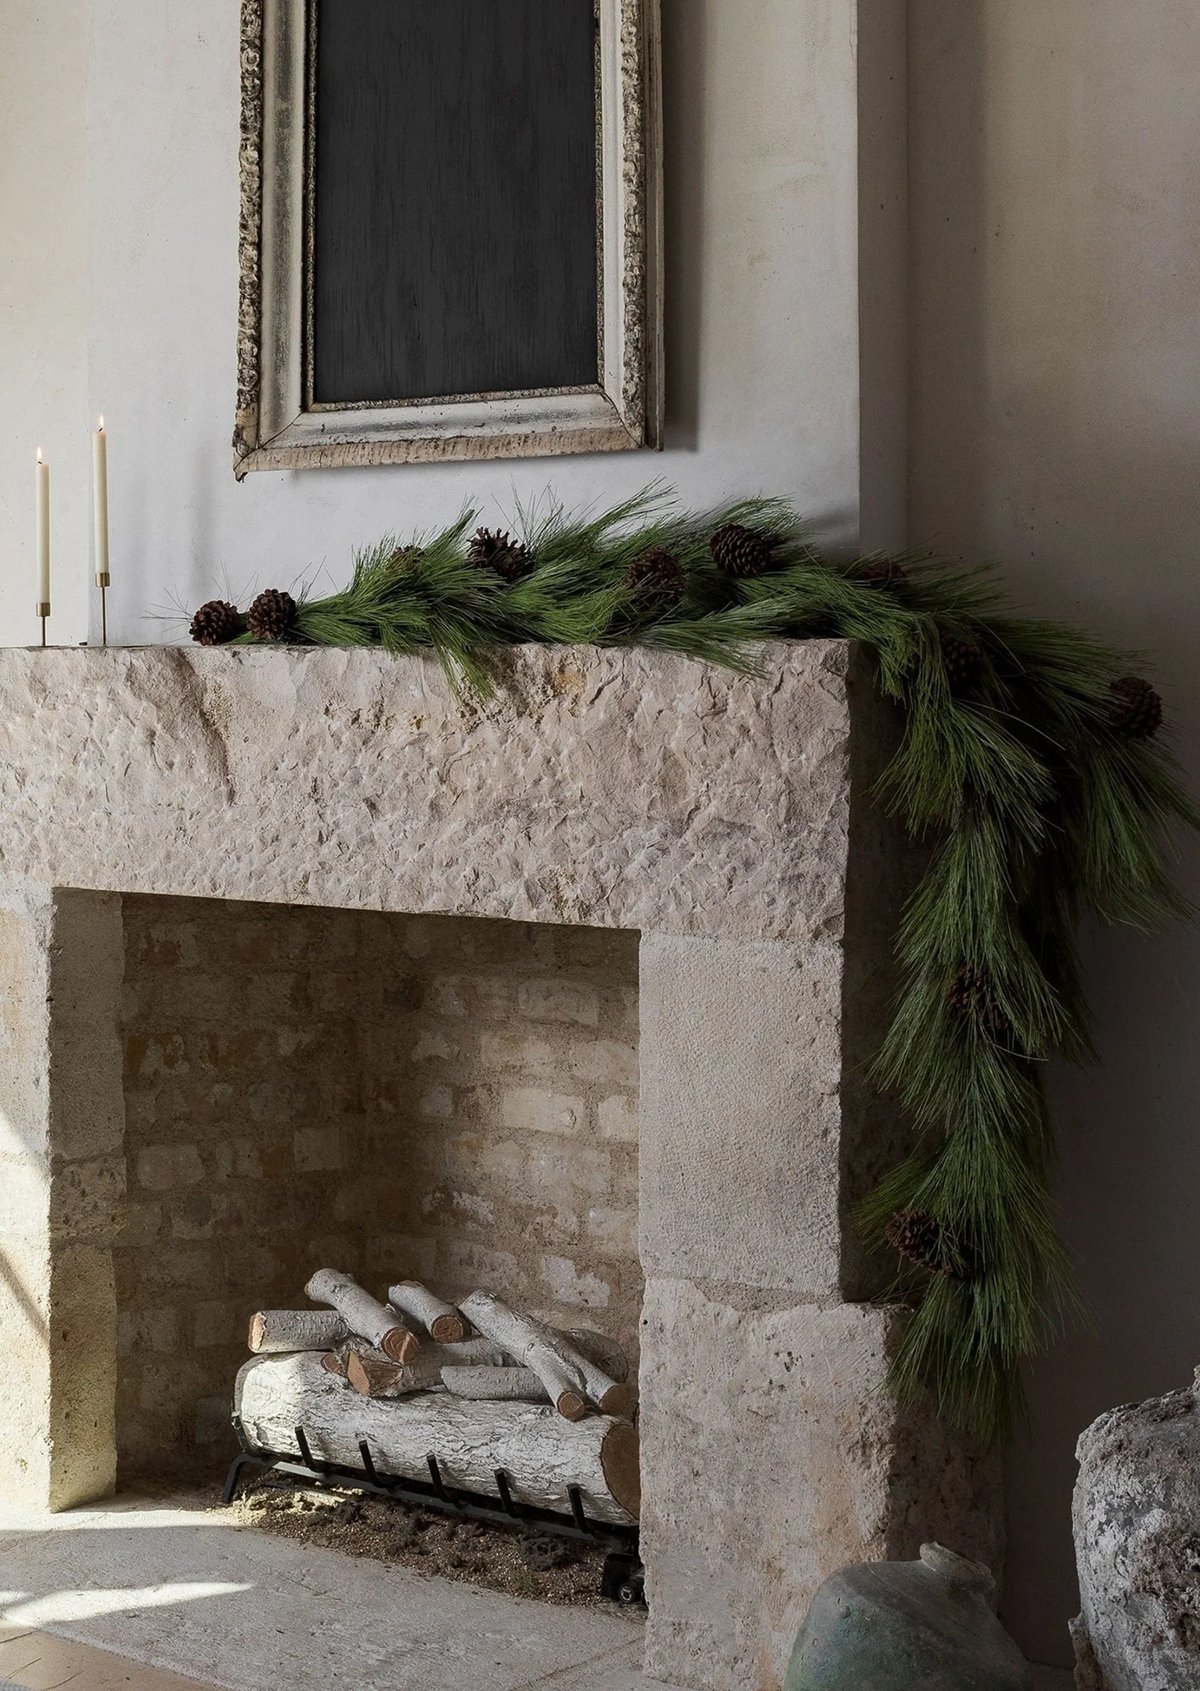 artificial longleaf pine garland draped on one side of a concrete fireplace